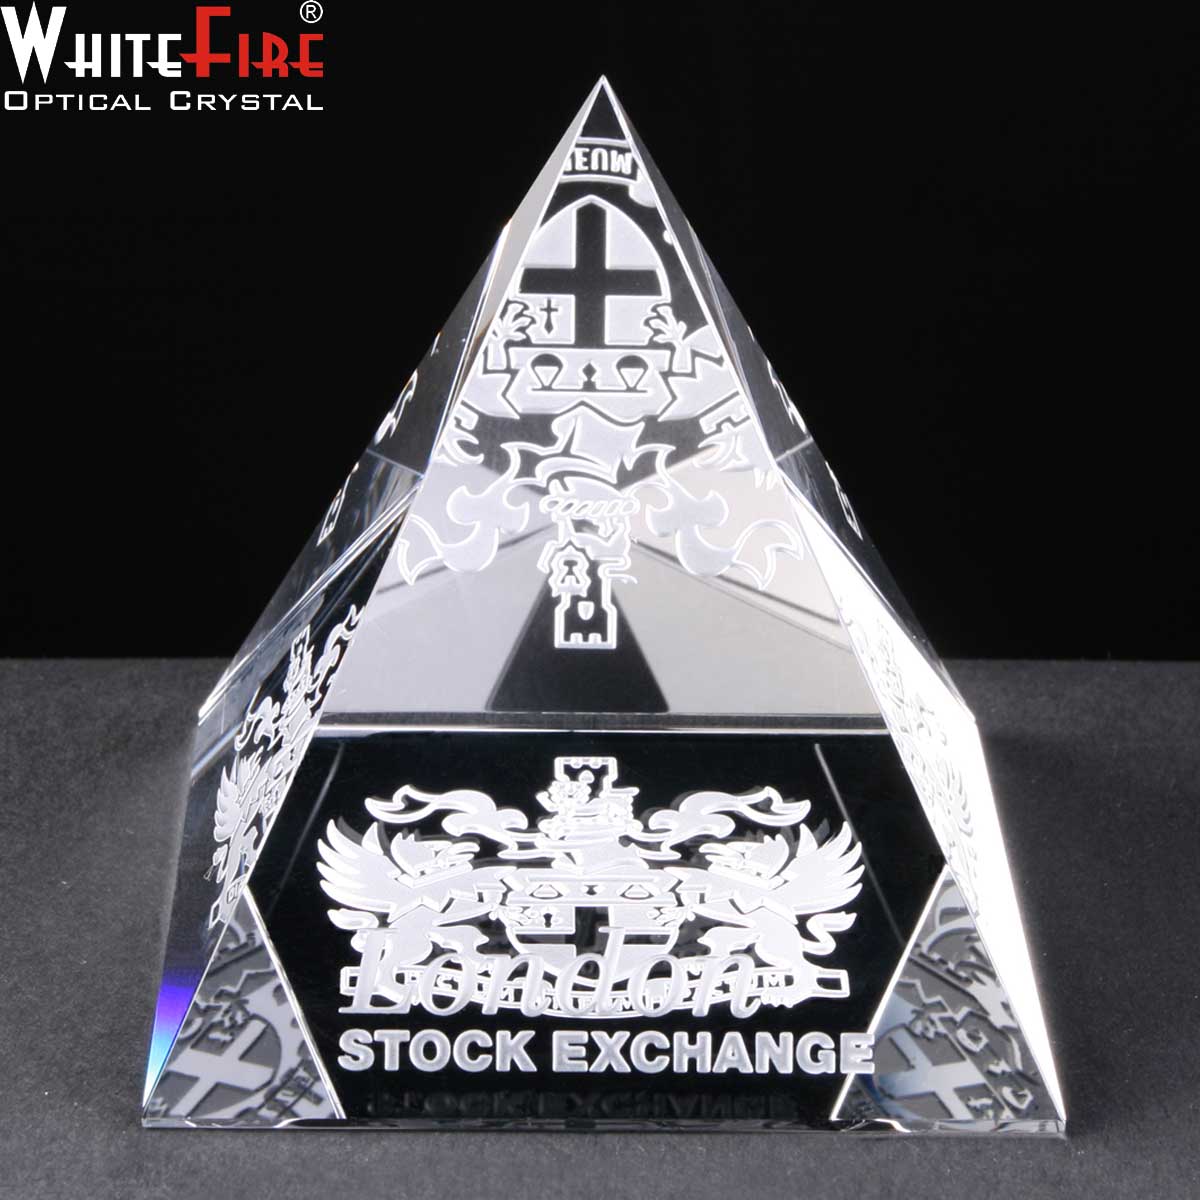 Engraved Optical Crystal Corporate Business Gift.